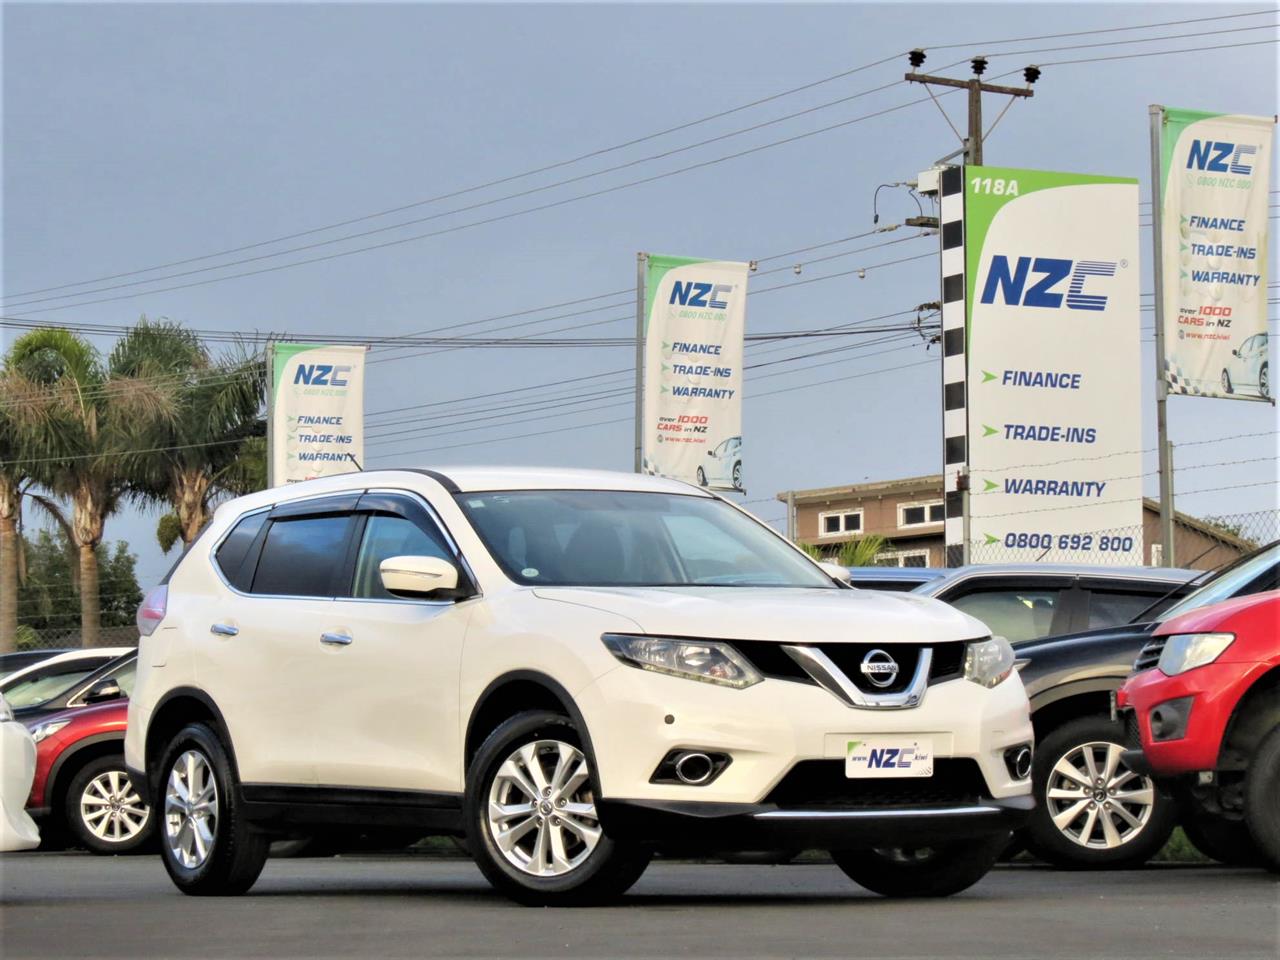 NZC 2014 Nissan X-TRAIL just arrived to Auckland